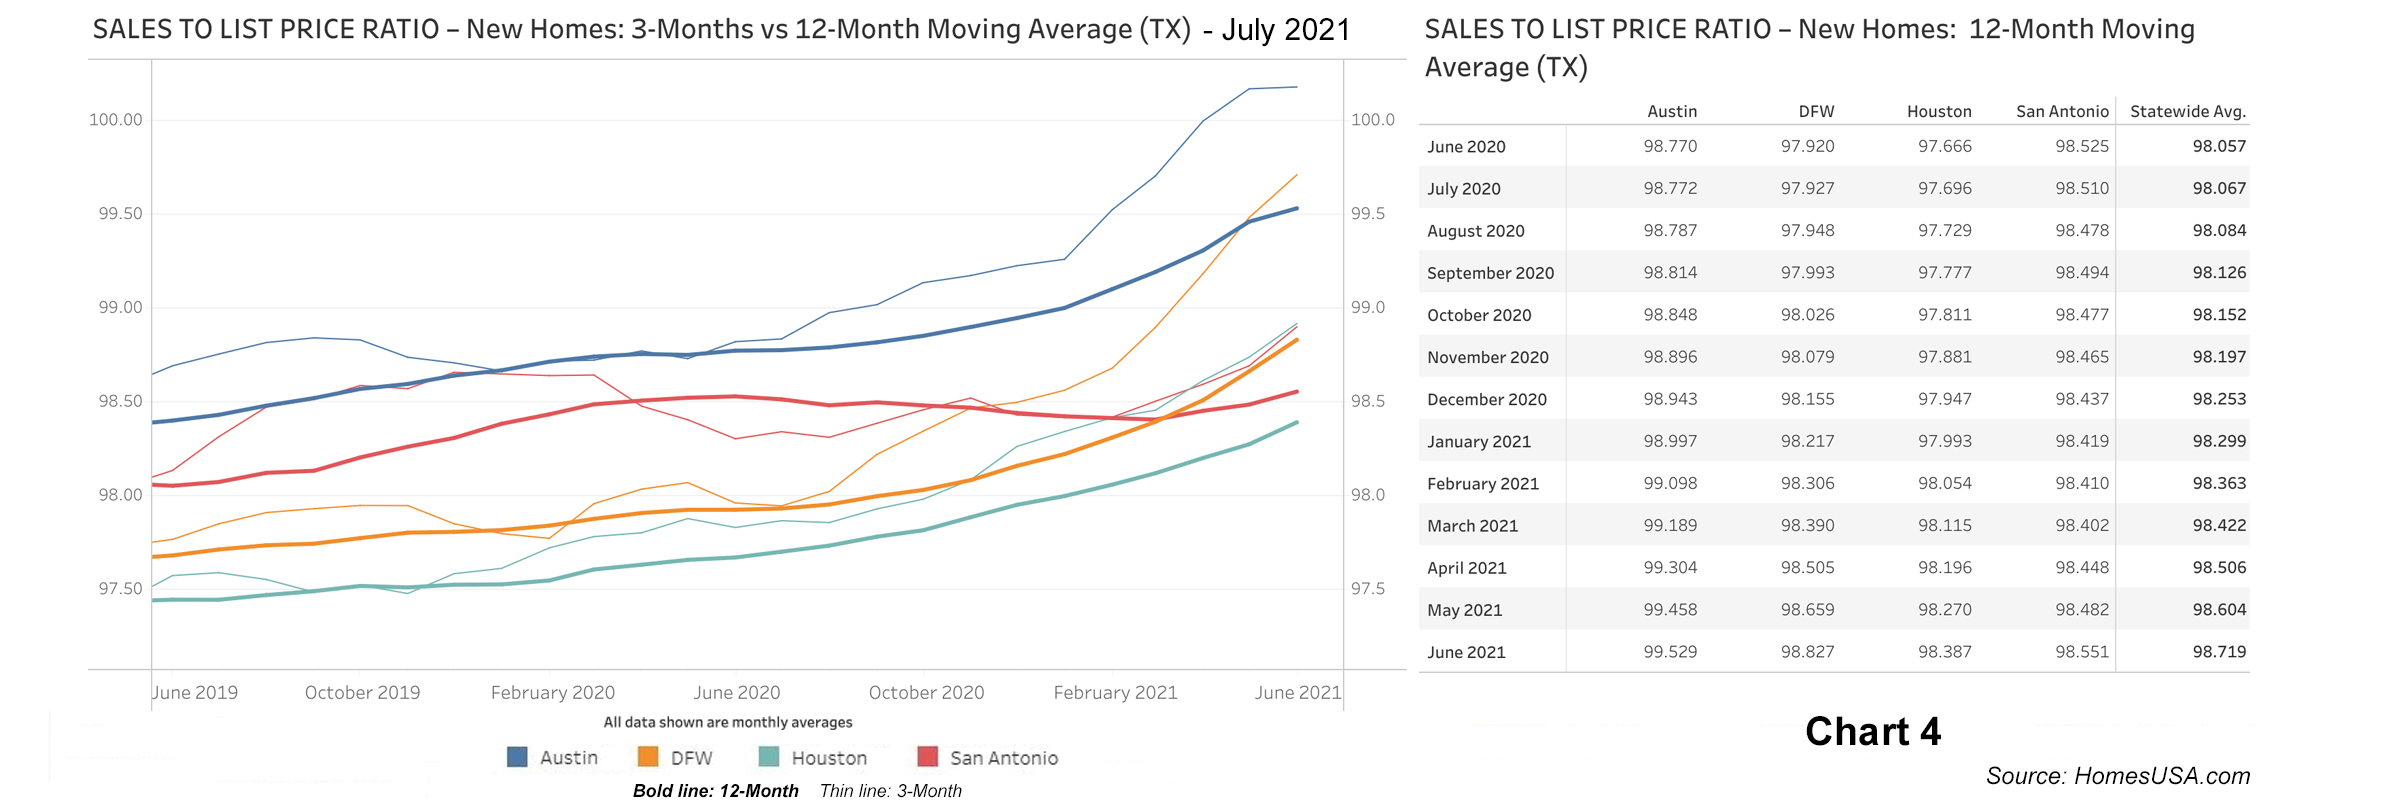 Chart 4: Sales-to-List-Price Ratio Data for Texas New Homes - June 2021